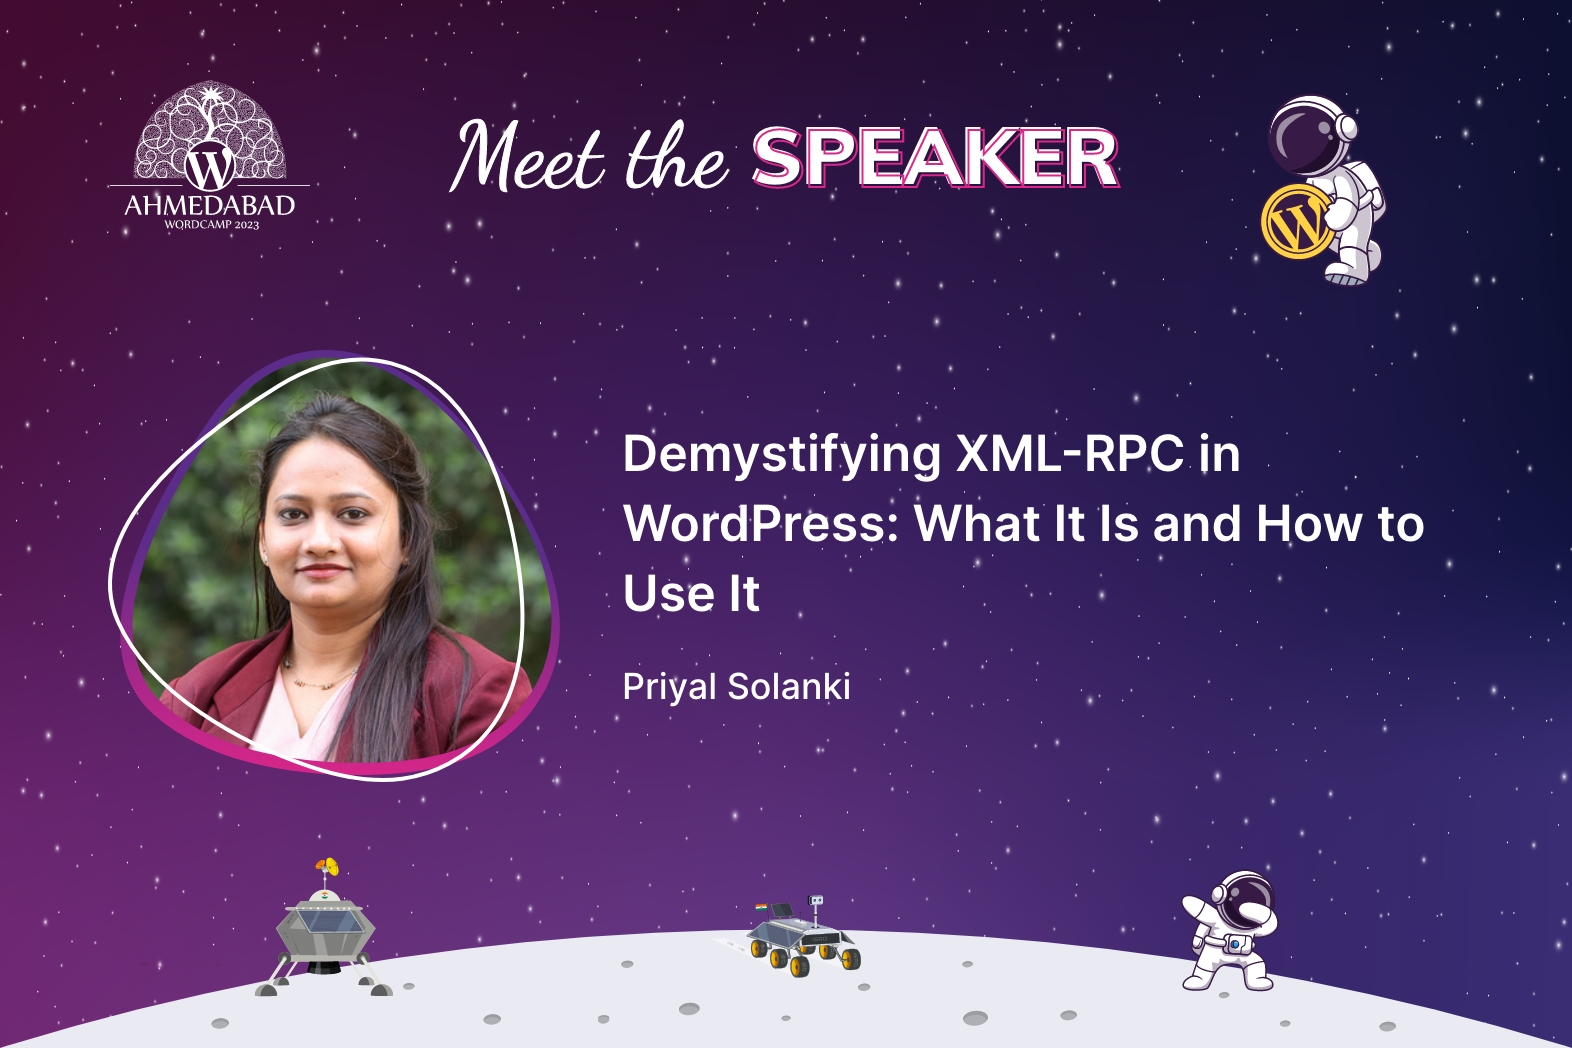 Demystifying XML-RPC in WordPress: What It Is and How to Use It By Priyal Solanki